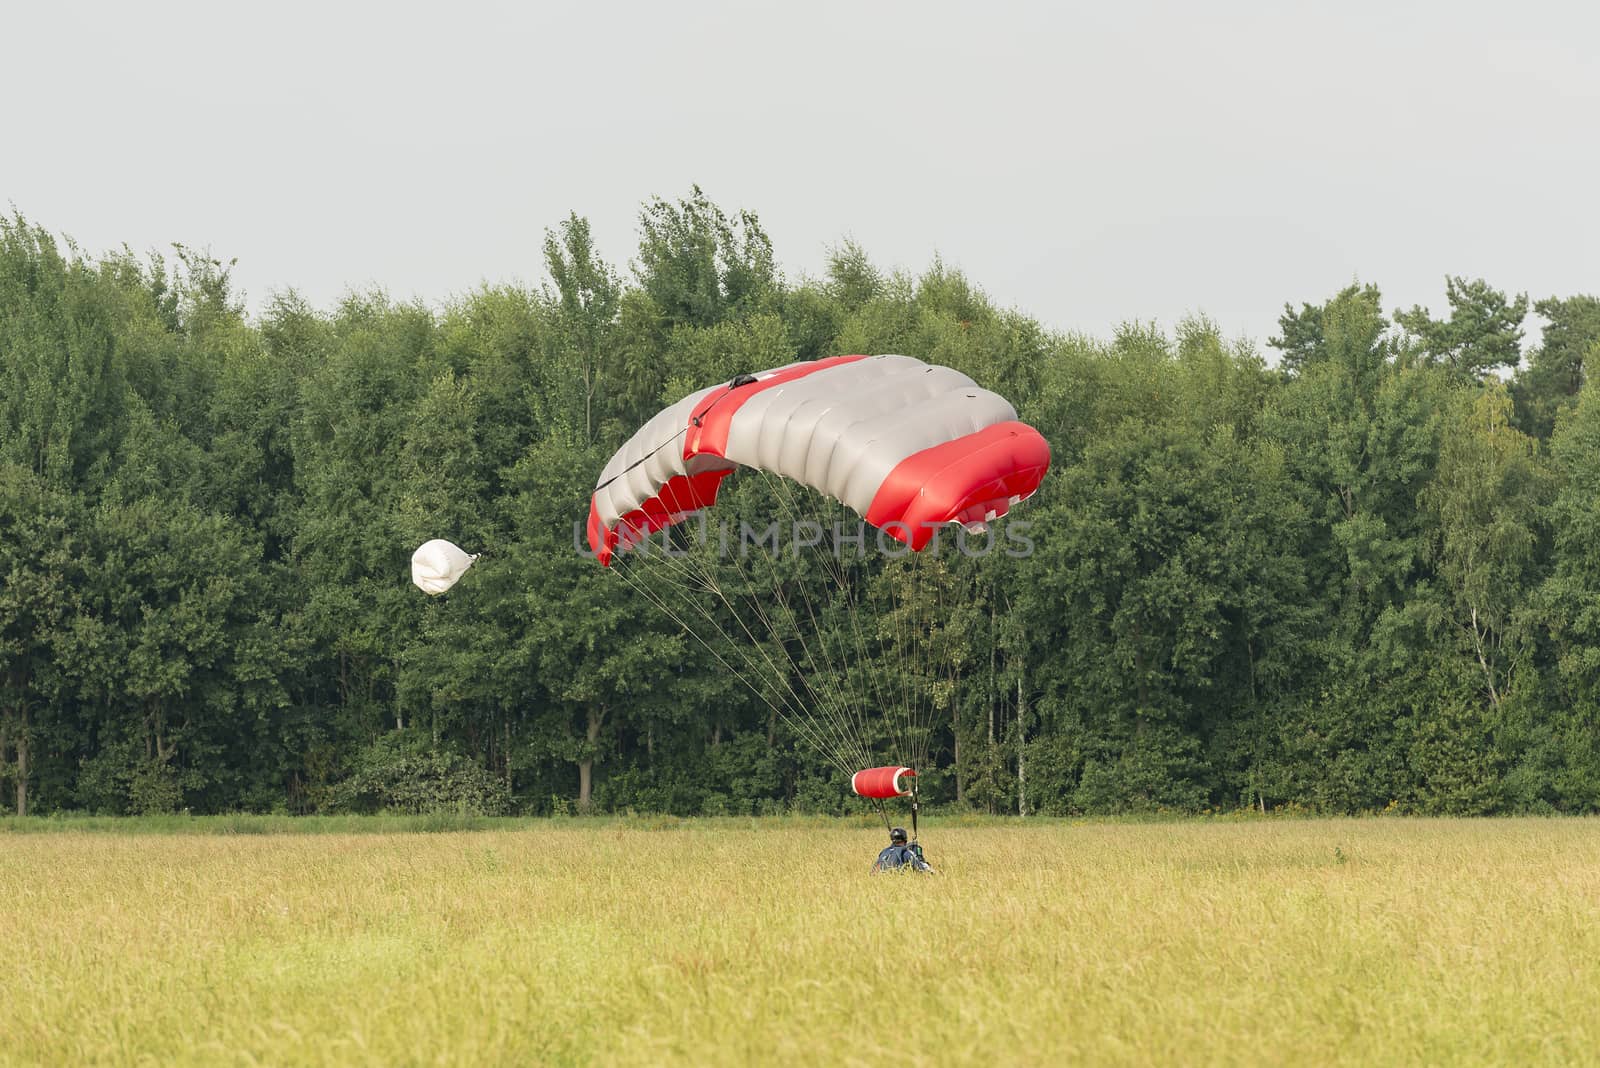 A just landed parachutist with a mattress-shaped parachute in a field
